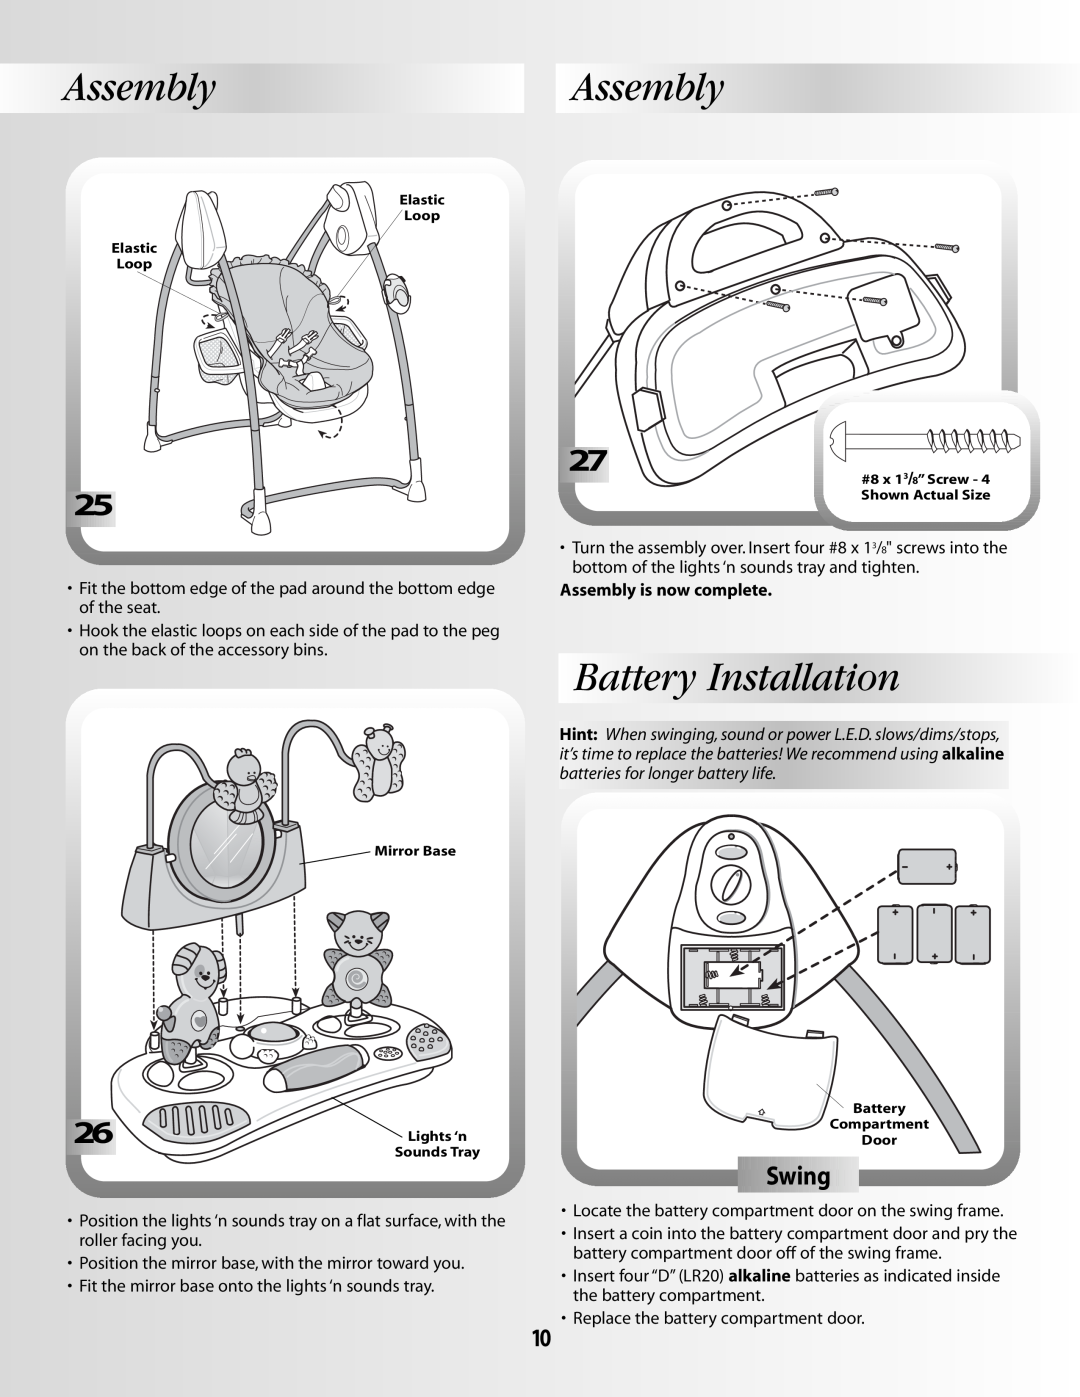 Fisher-Price B1637 manual AssemblyAssembly, Battery Installation, Swing, Assembly is now complete 